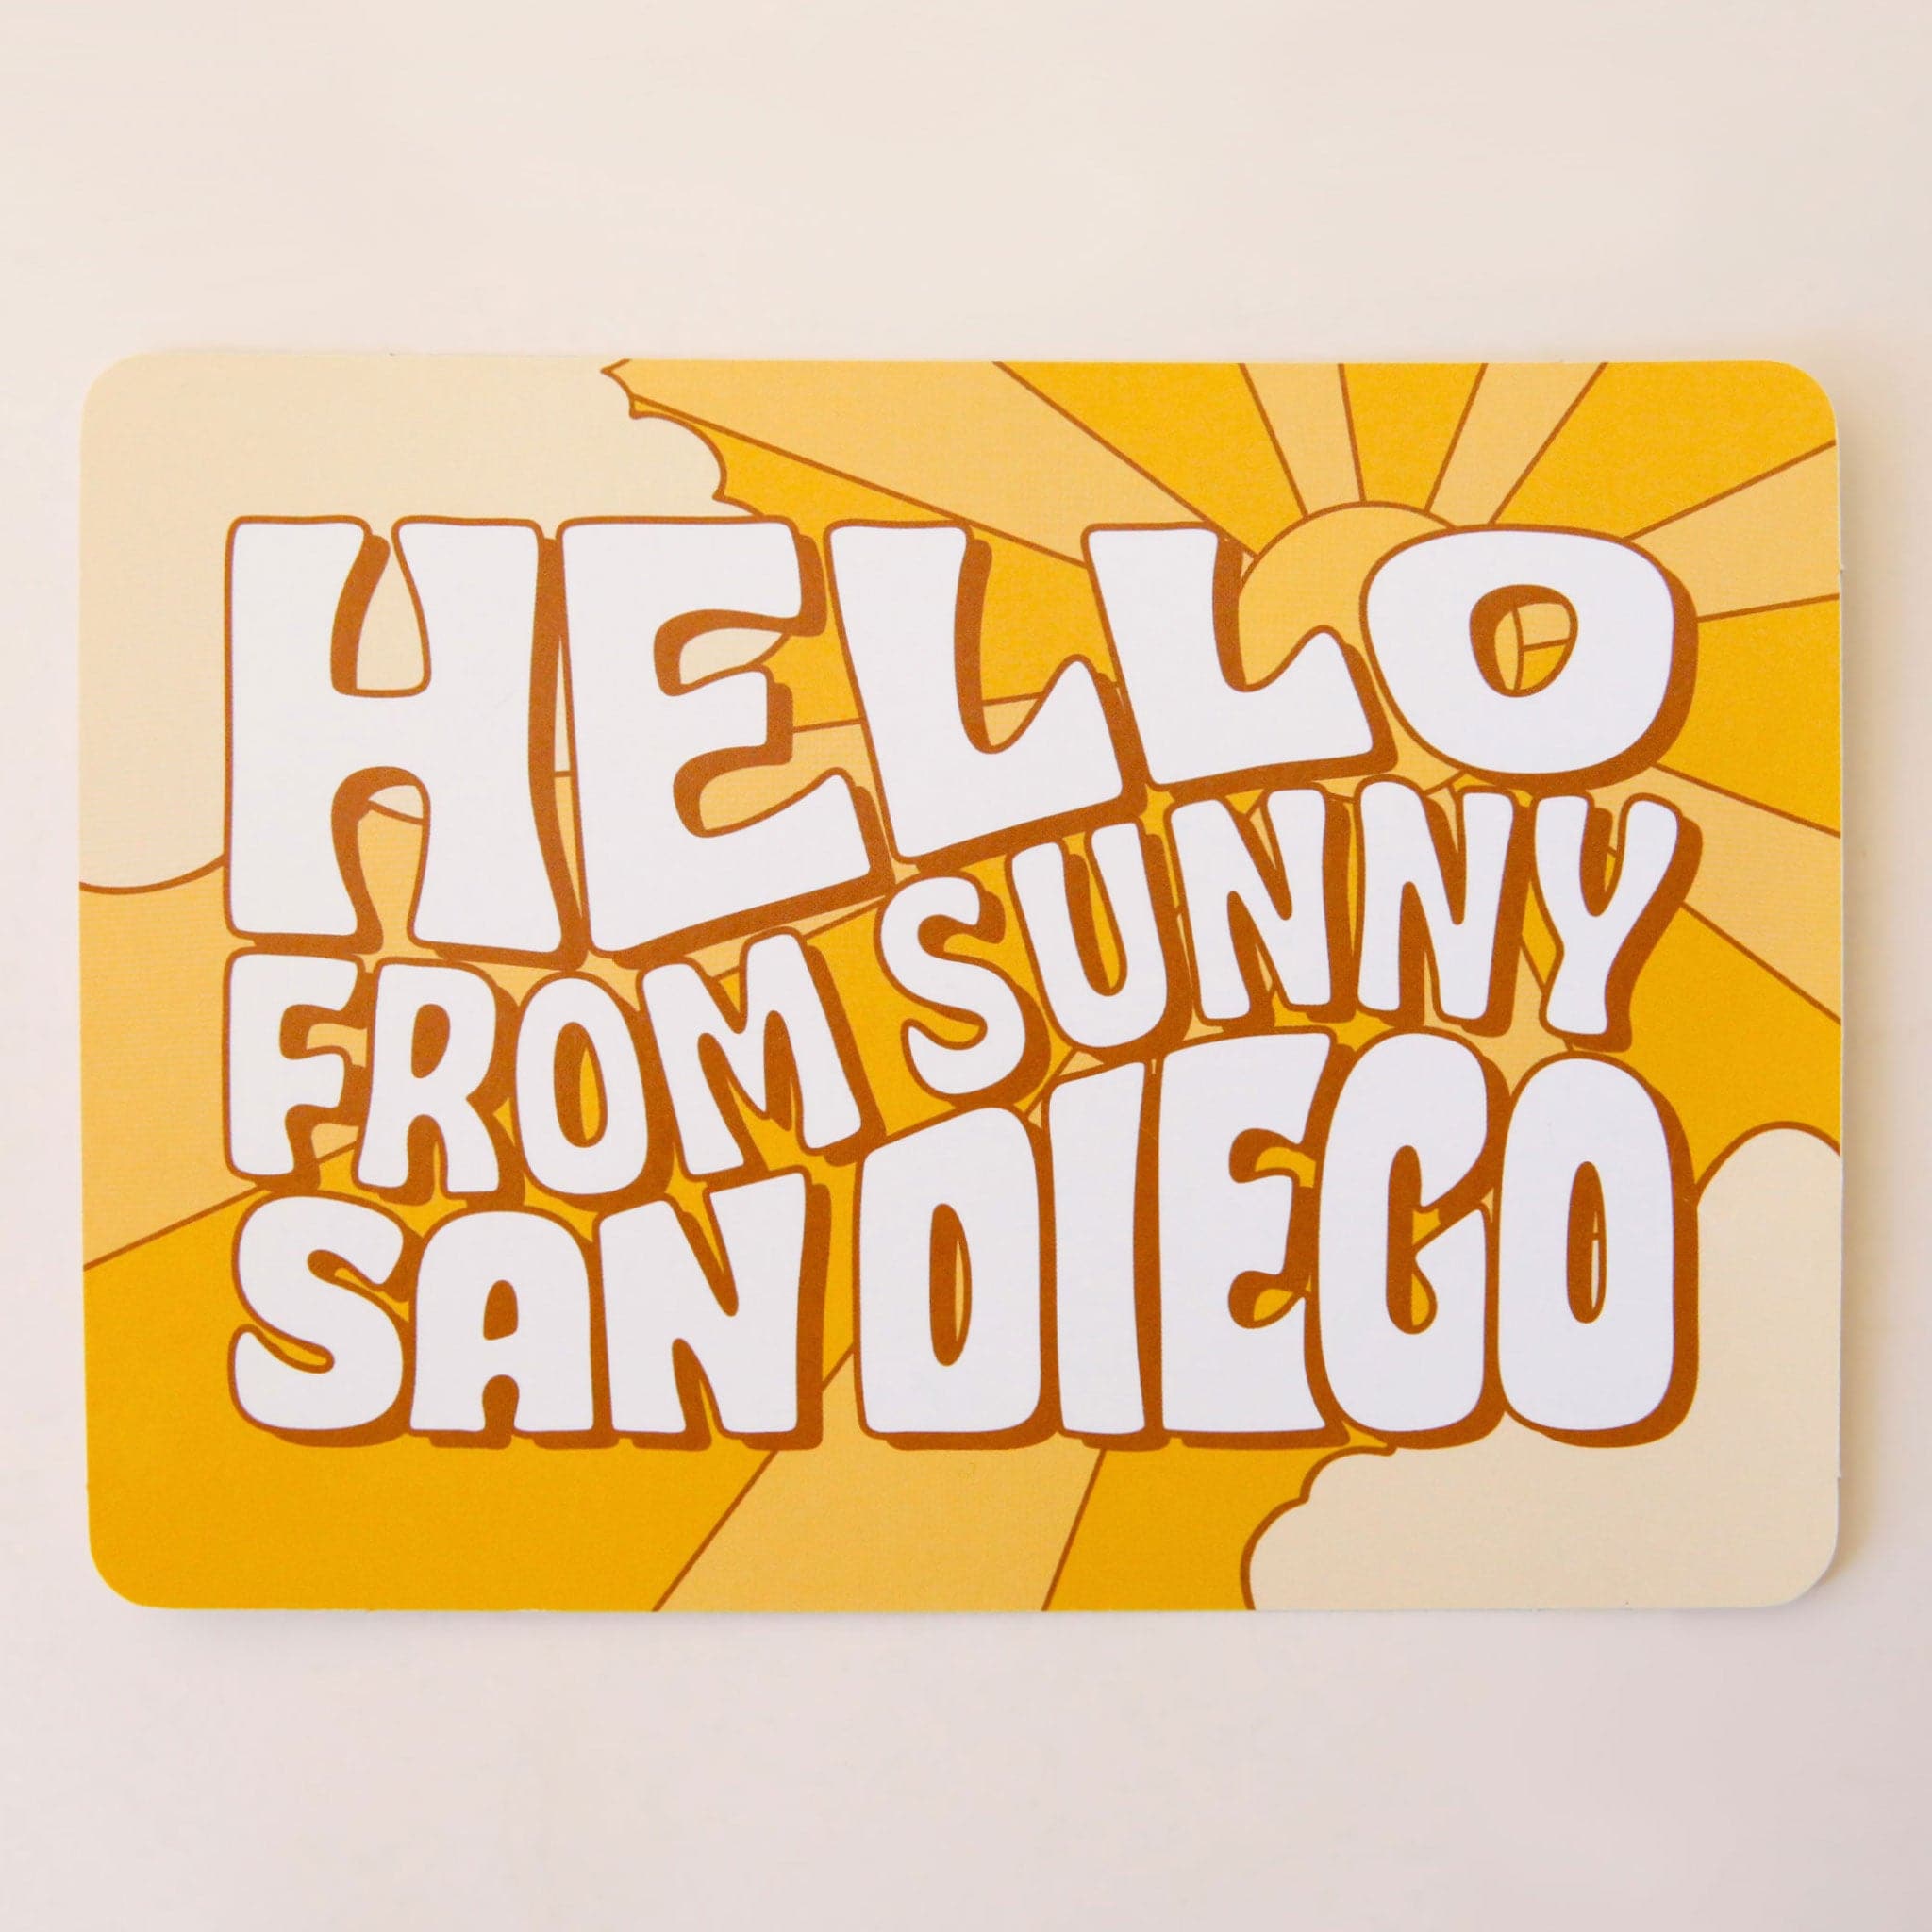 On a cream background is a yellow postcard with a sun and sunray illustration along with text in the center that reads, "Hello From Sunny San Diego" in cream letters. 